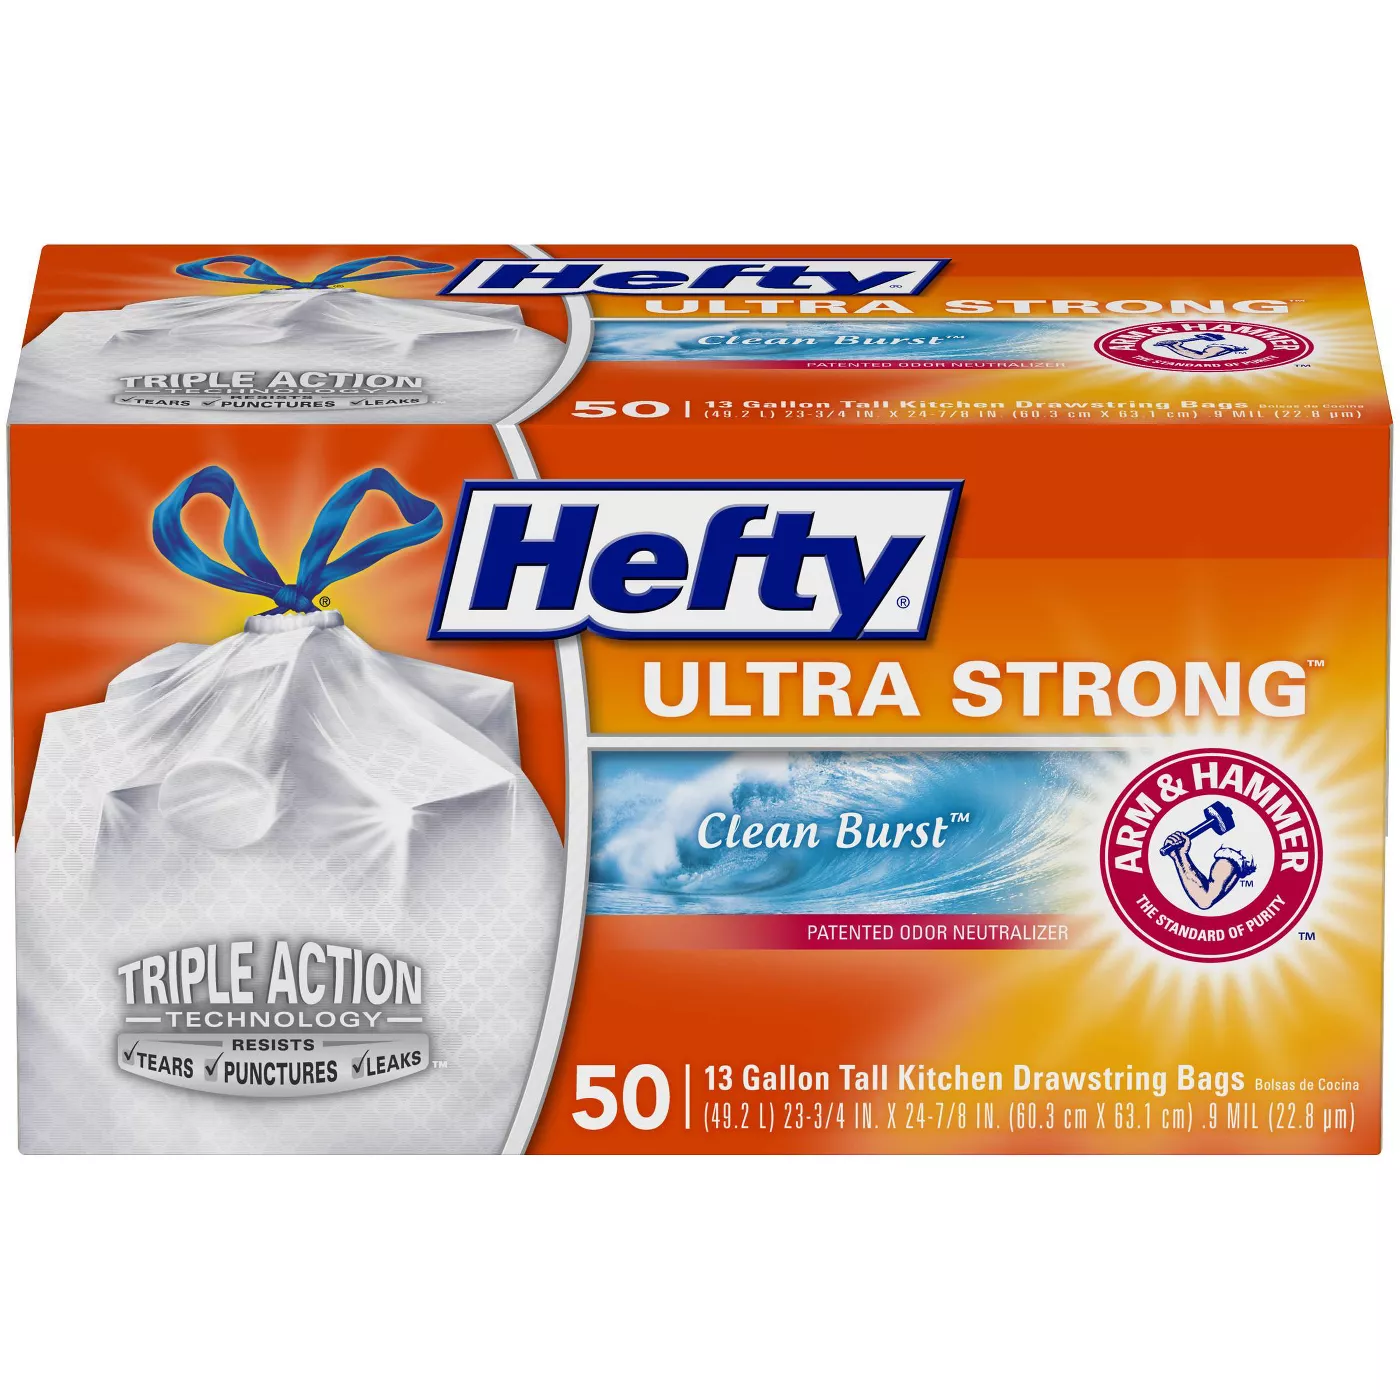 Hefty Ultra Strong Tall Kitchen Drawstring Trash Bags - Clean Burst Scent - 13 Gallon - 50ct - image 1 of 6